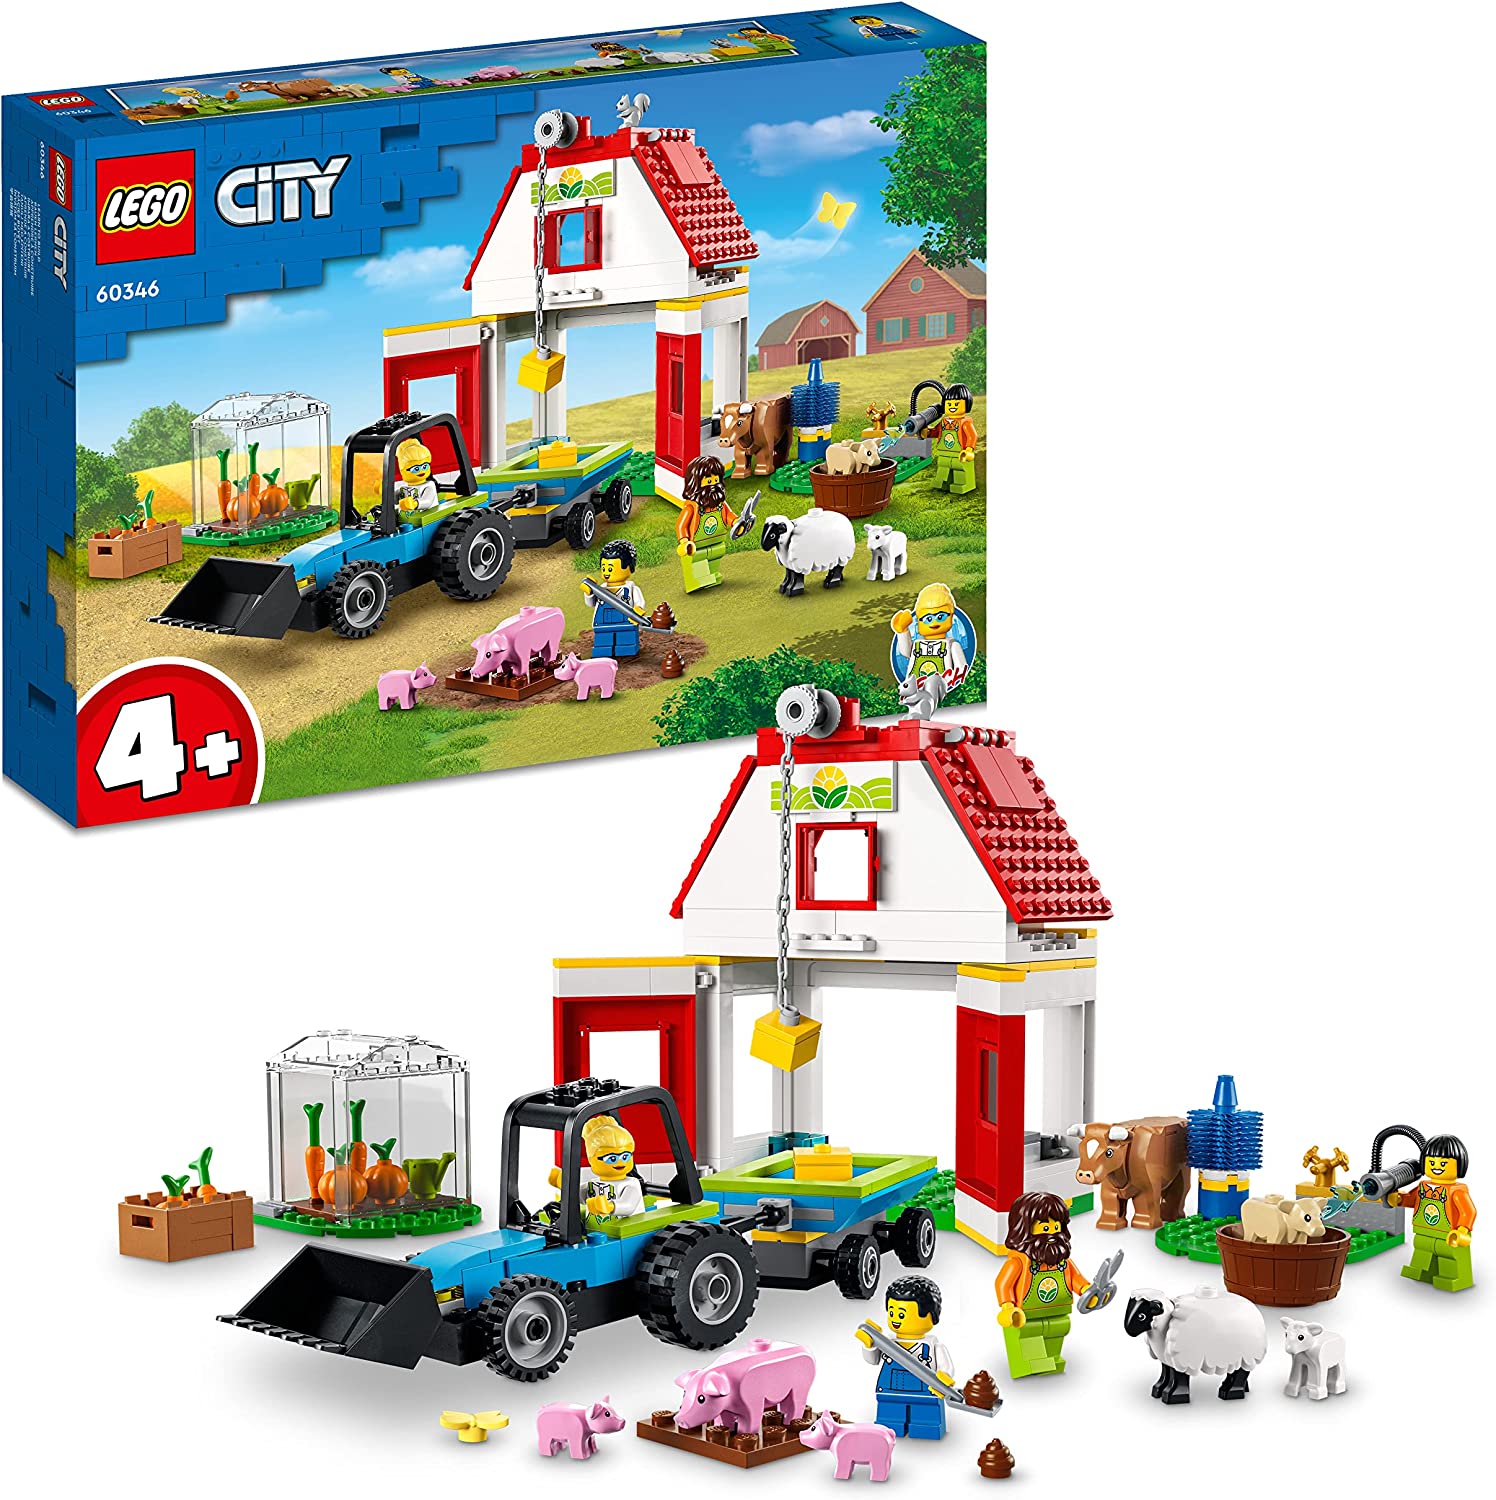 LEGO 60346 City Farm with Animals, Sheep, Pig, Cow and More and Toy Tractor with Trailer, Educational Toy for Children from 4 Years